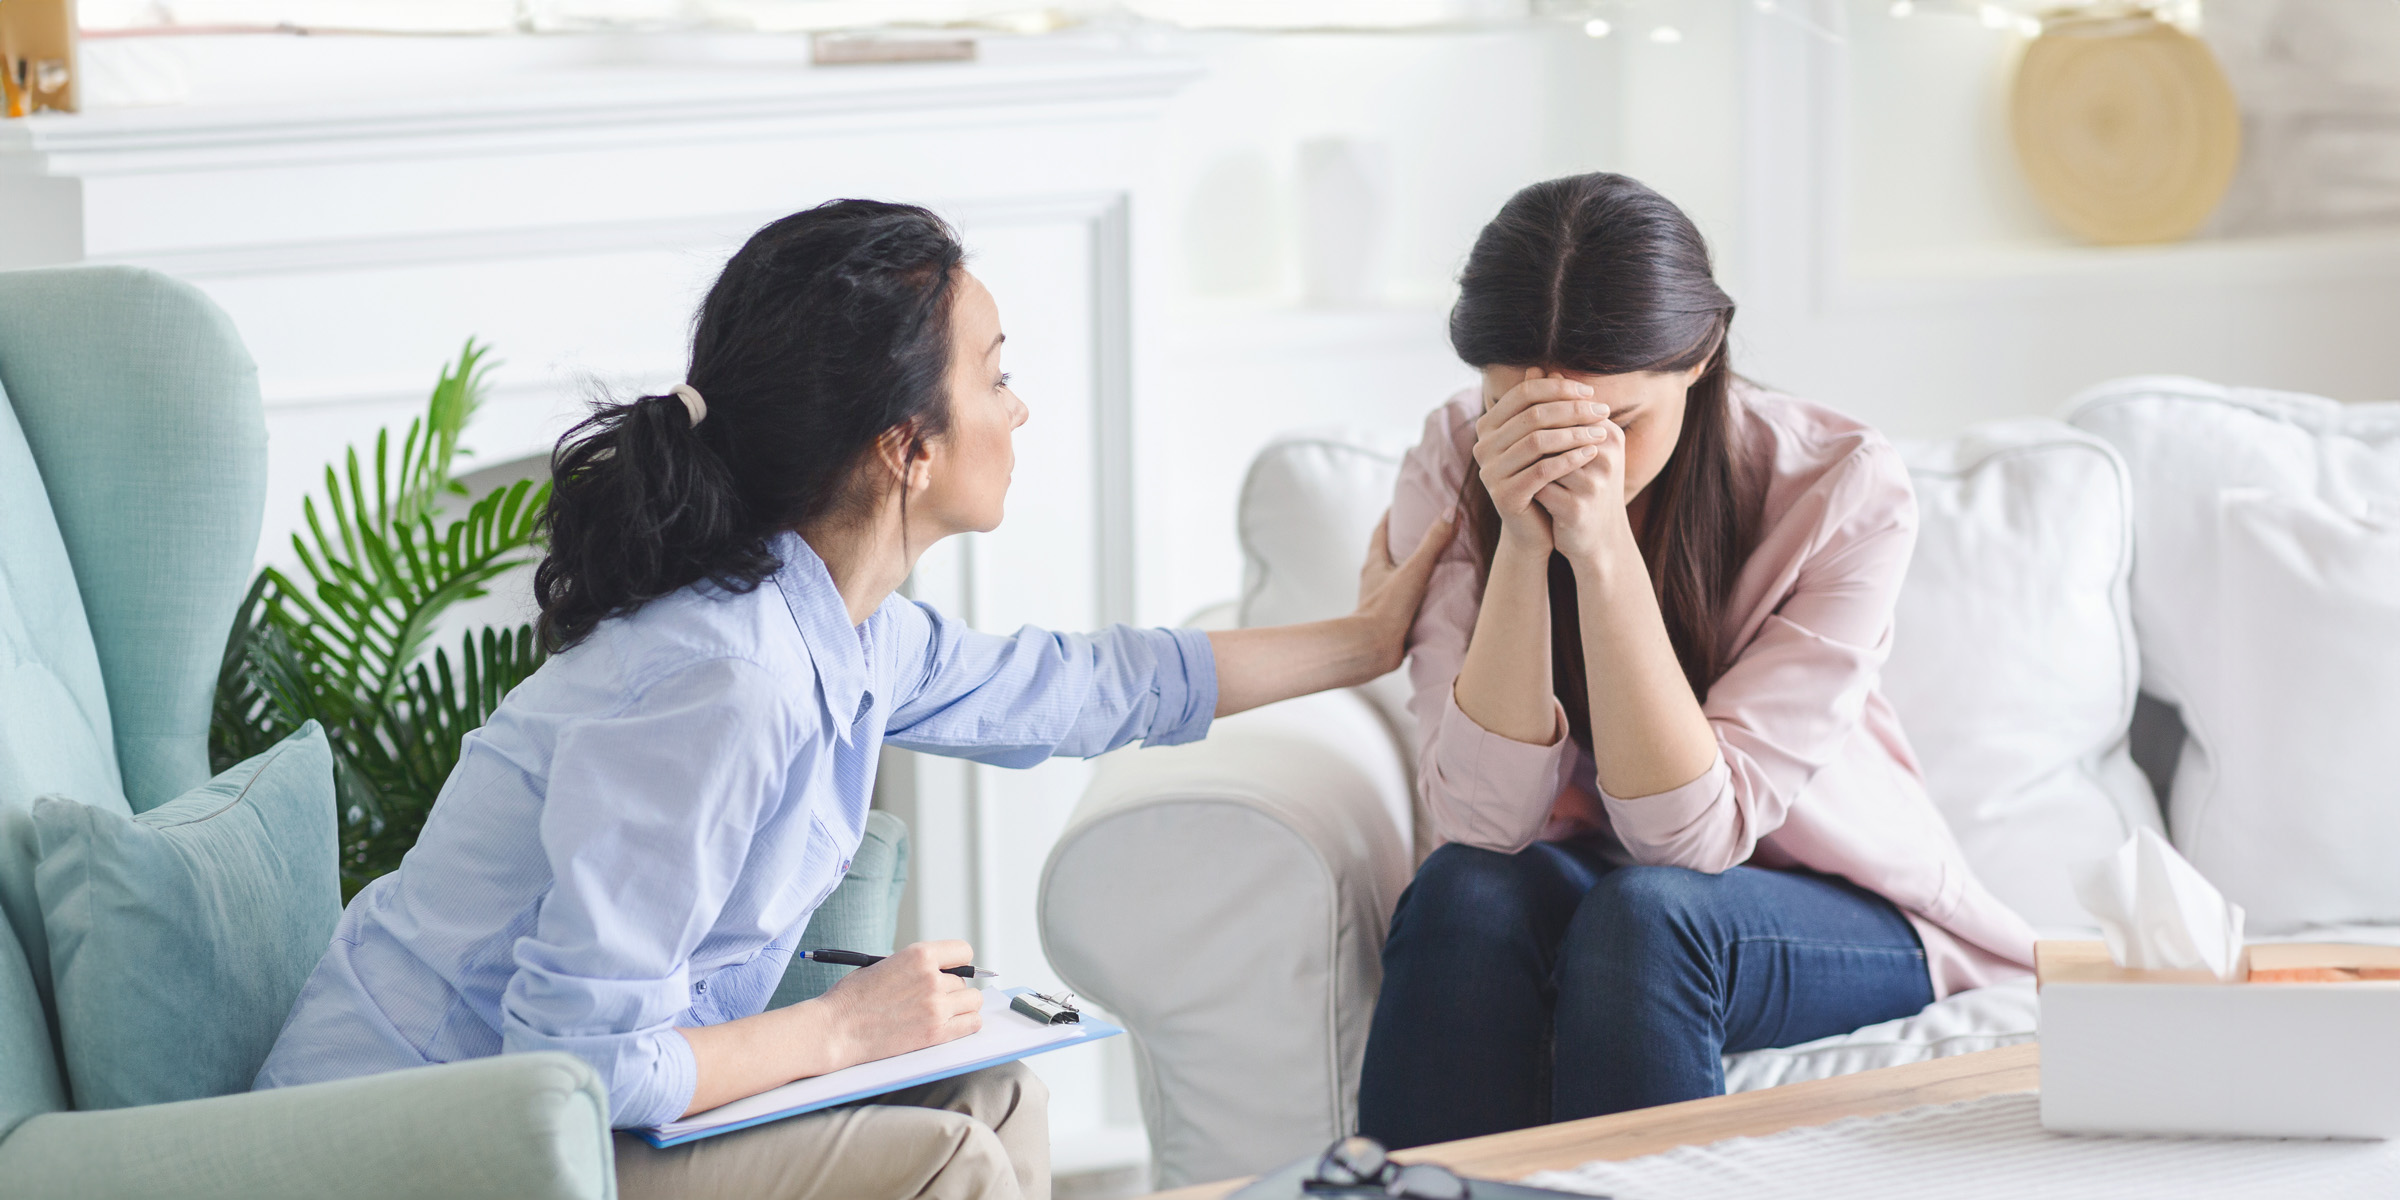 young upset woman crying at therapist session